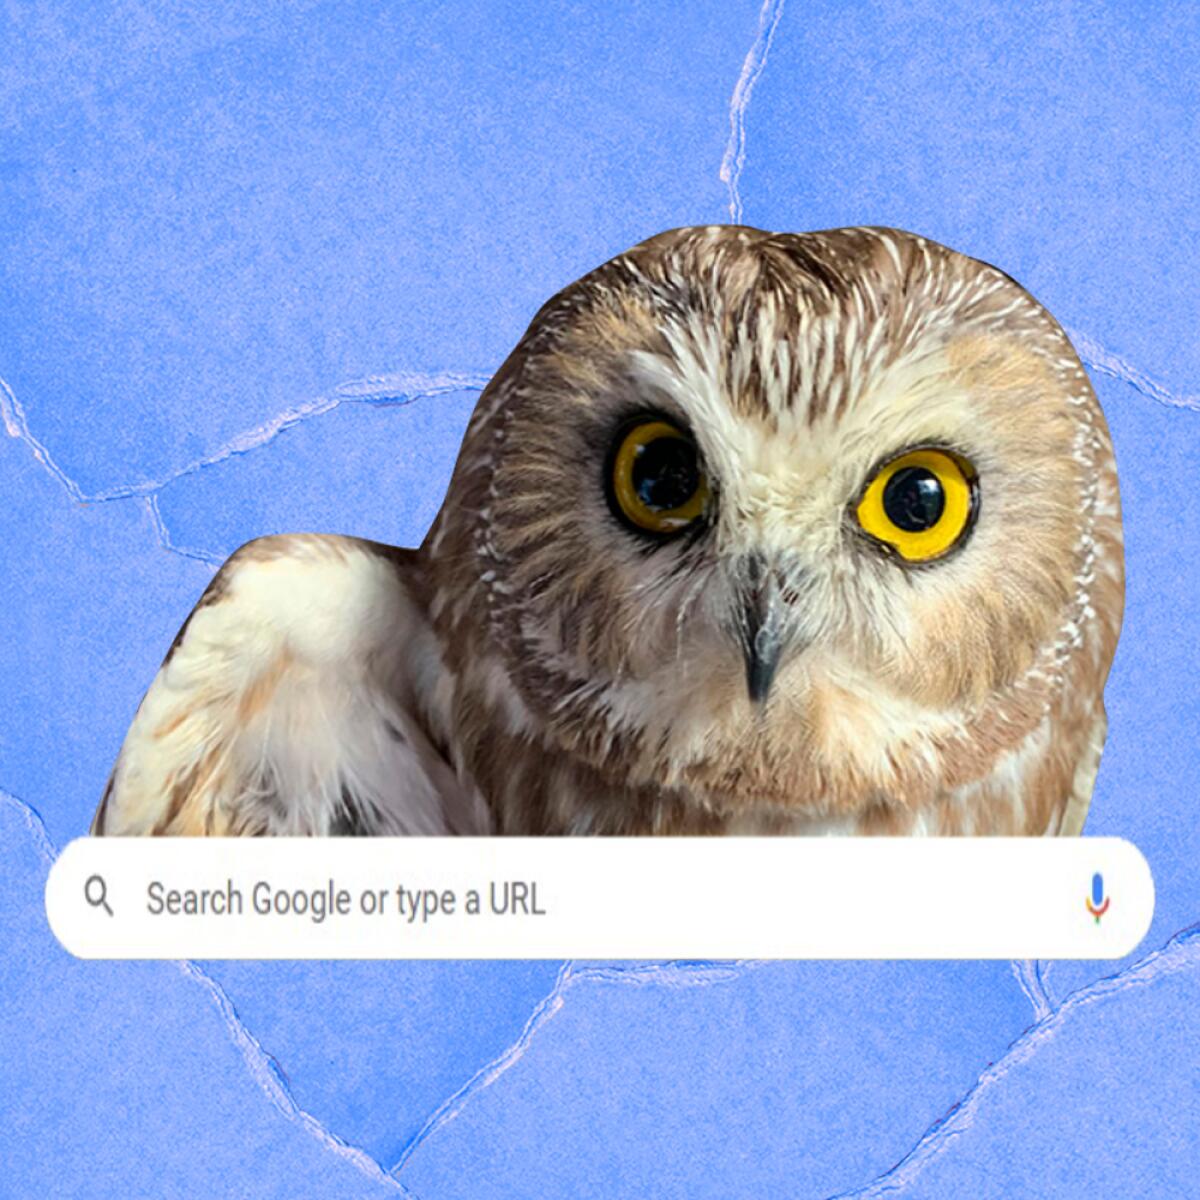 An illustration with a closeup photo of an owl above a Google search bar.